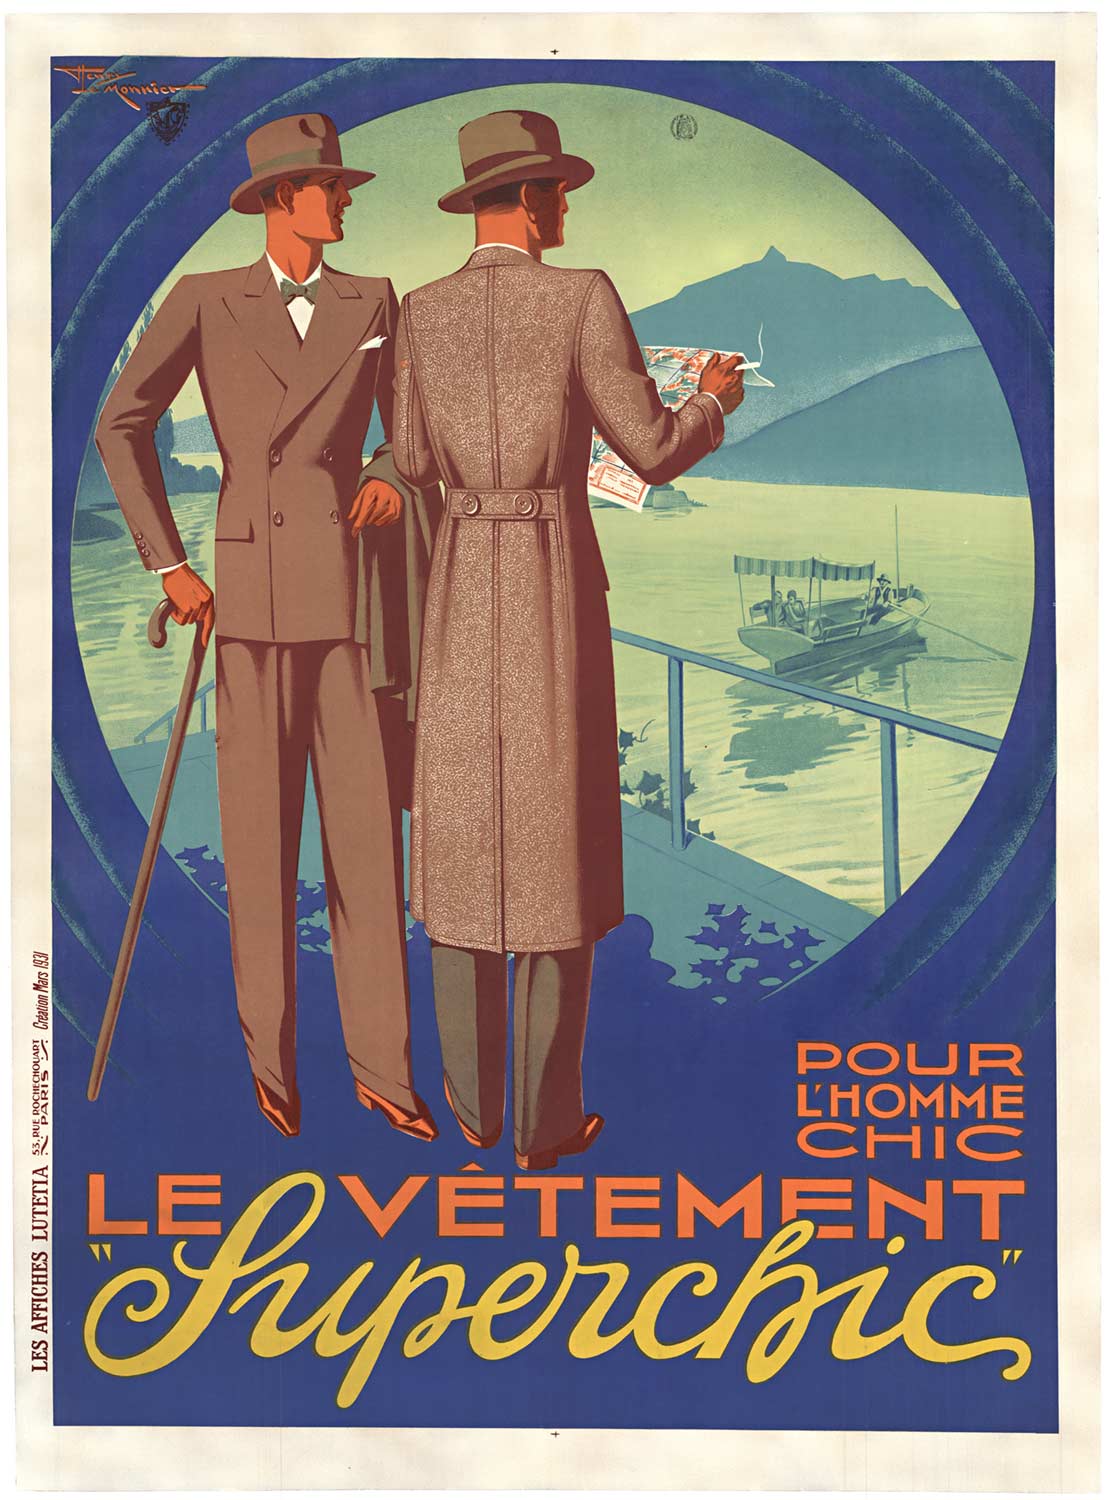 Original Le Vetement “Superchic” pour l’homme vintage French fashion poster. <br>Linen backed and ready to frame. These two dapper men, dressed in the finer suits and outerwear from Superchic” glaze out over the lake with a boat reflecting in the water.